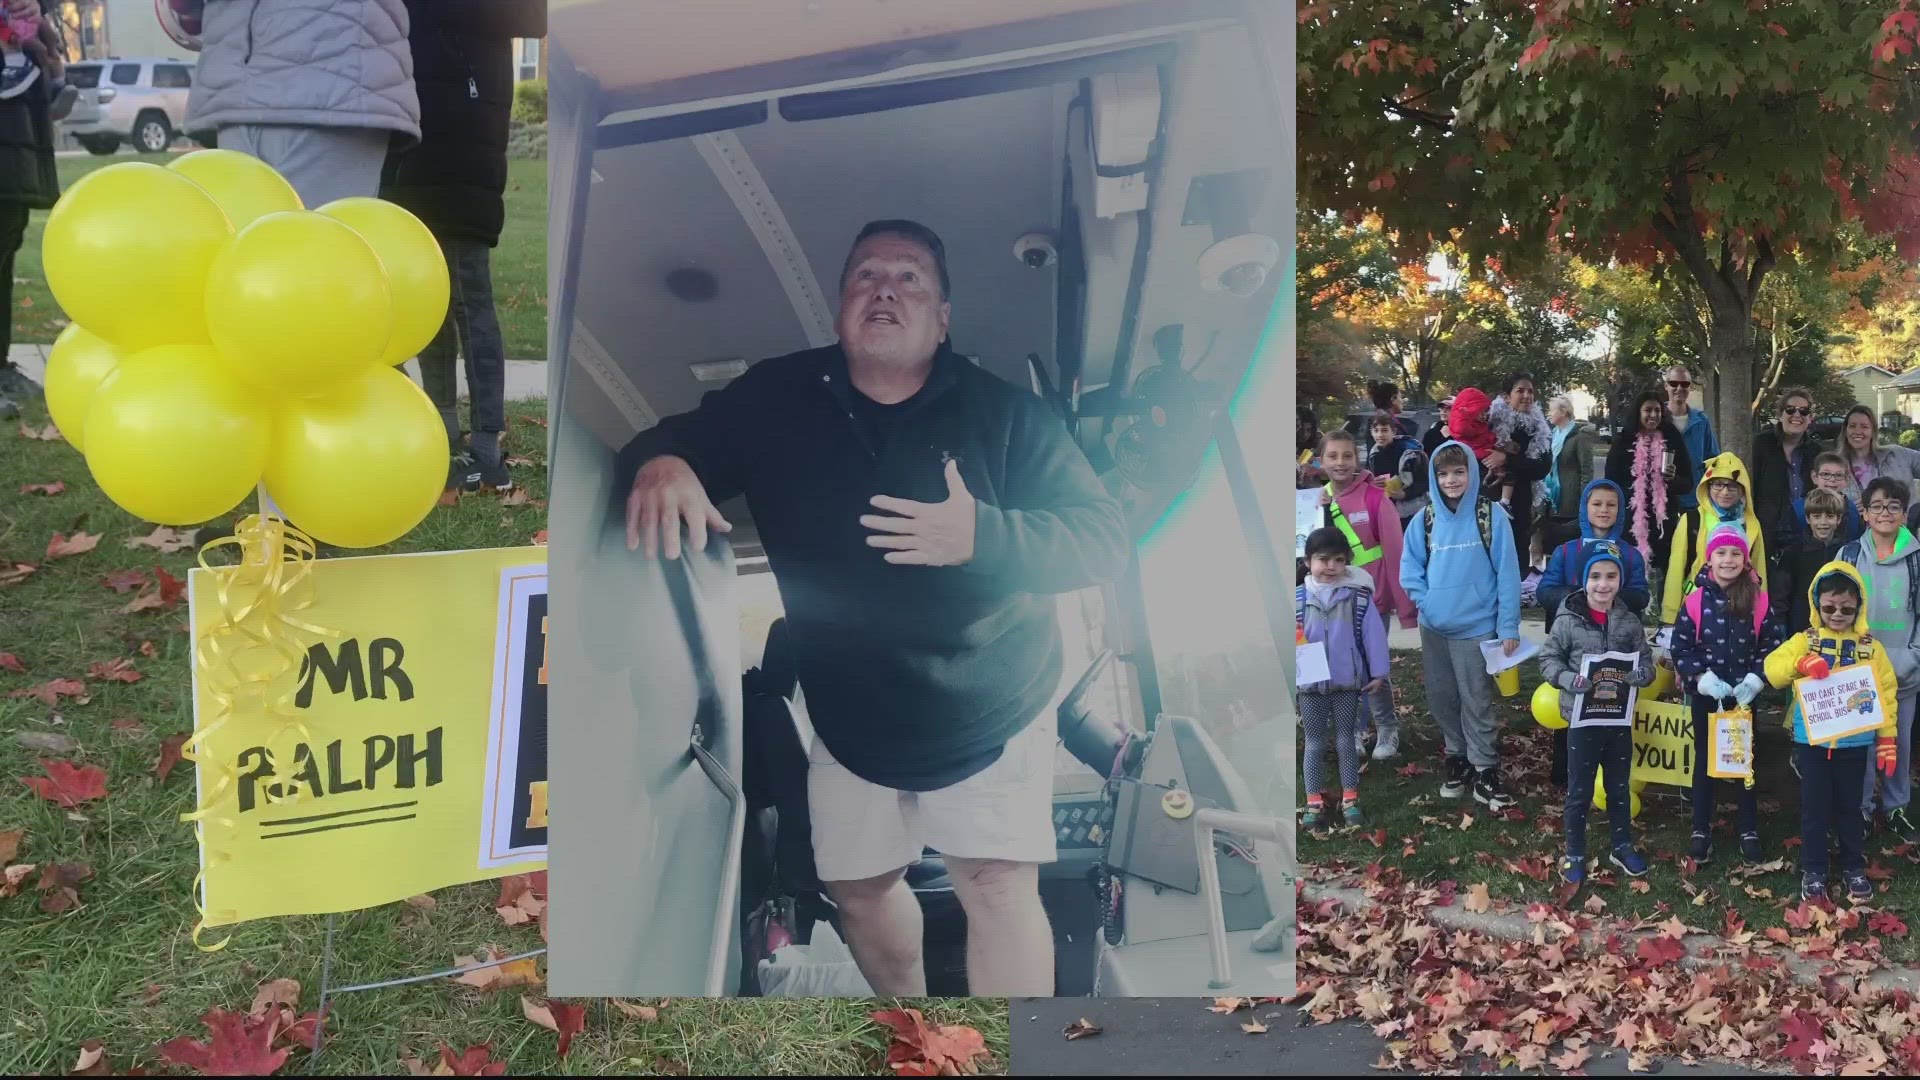 A school bus driver with a 30-year career under his seatbelt is getting the recognition he deserves. The heartwarming celebration for Mr. Ralph in Rockville